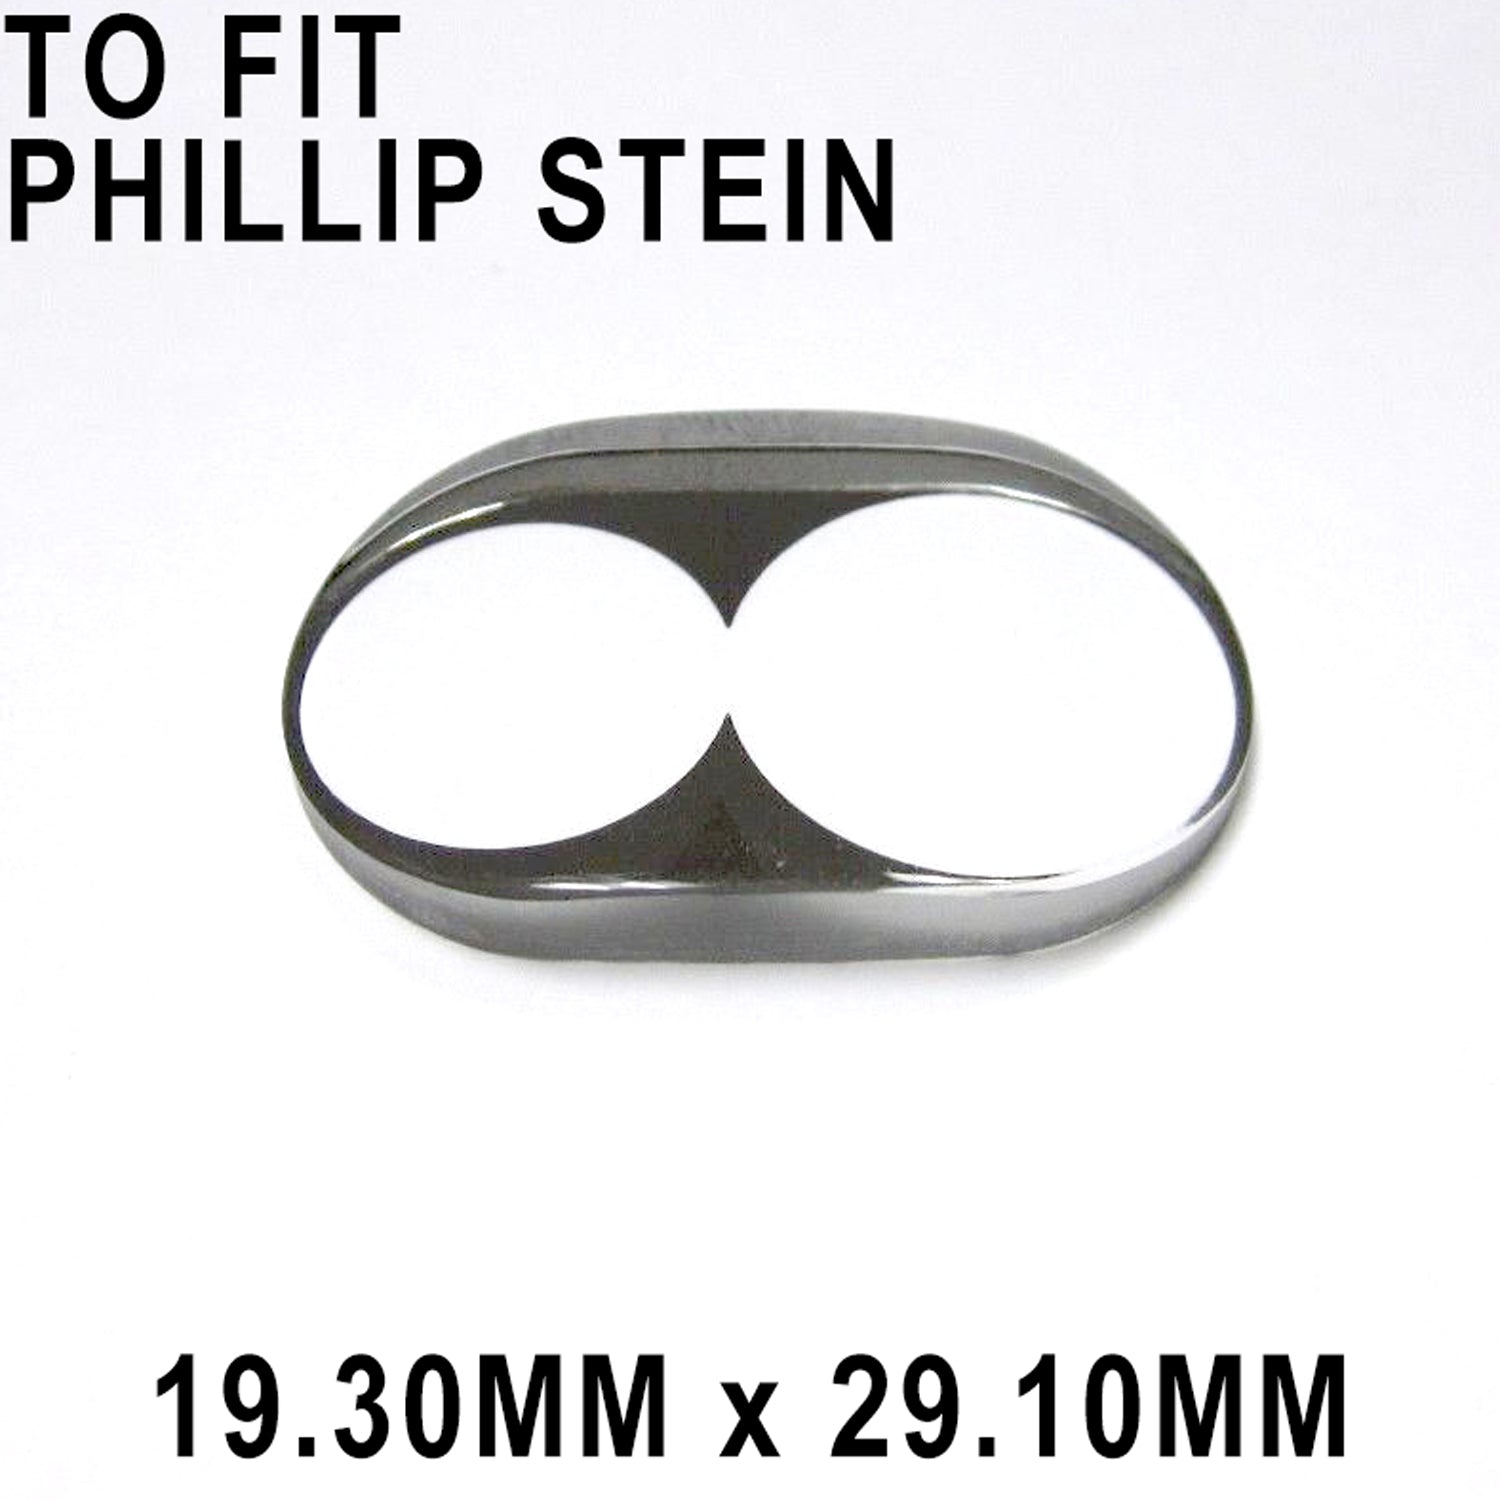 Designer Crystals Made to Fit Phillip Stein Name Brand Watches